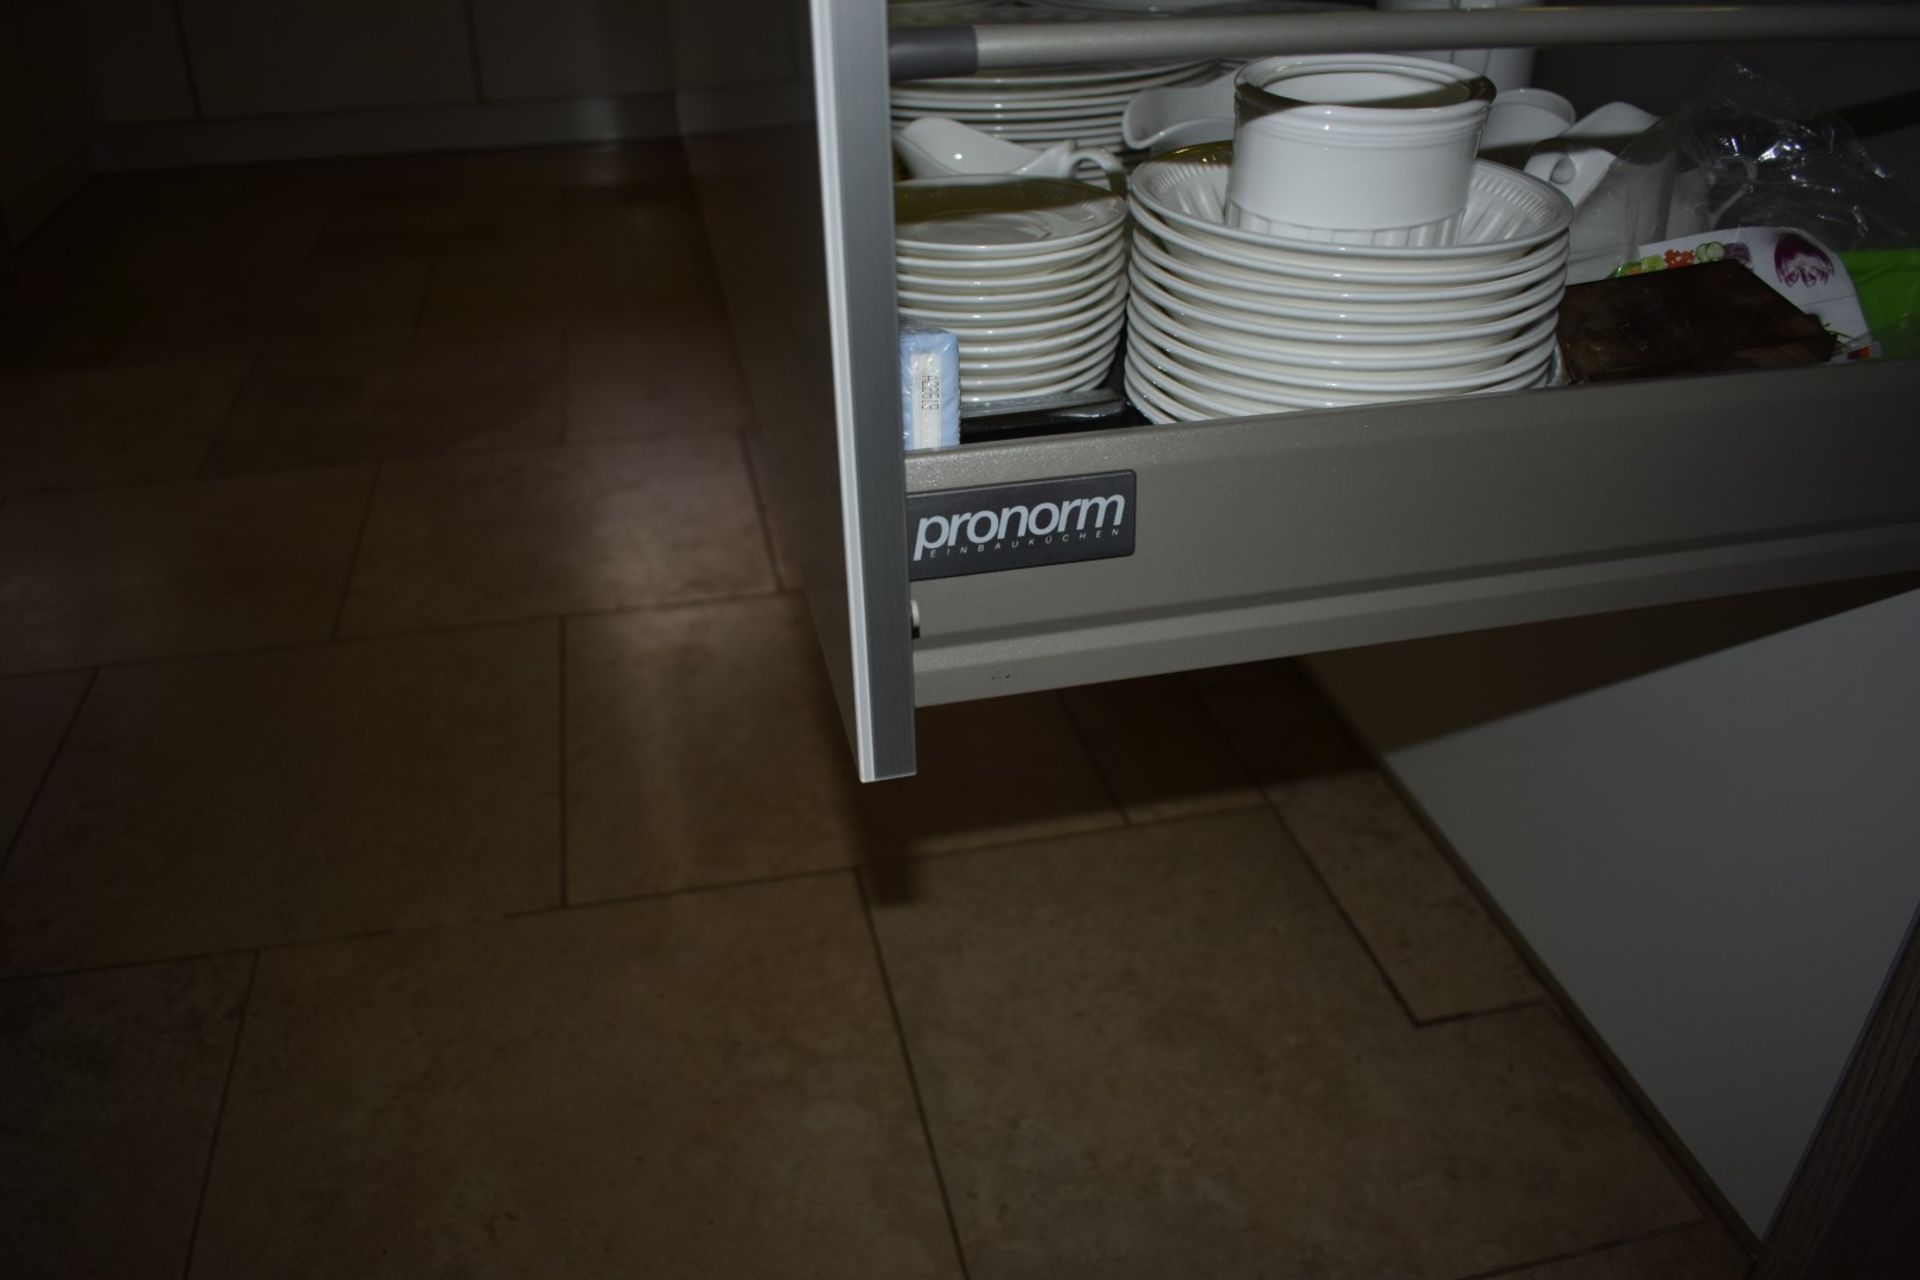 1 x Pronorm Einbauküchen German Made Fitted Kitchen With Contemporary High Gloss Cream Doors and - Image 40 of 50